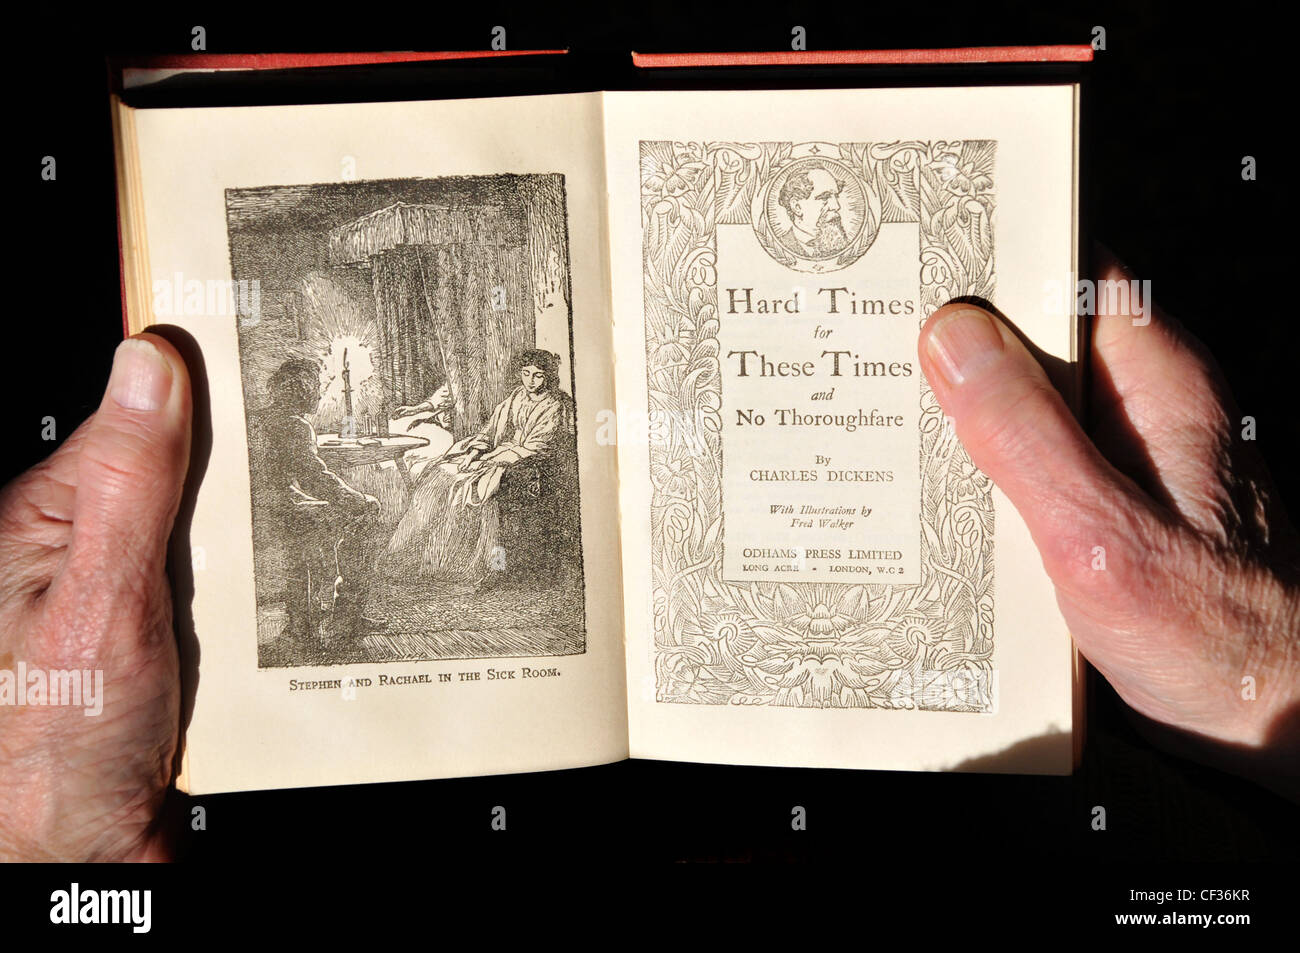 An old illustrative  book ' Hard Times for These Times' by Charles Dickens being read by an elderly man. Stock Photo